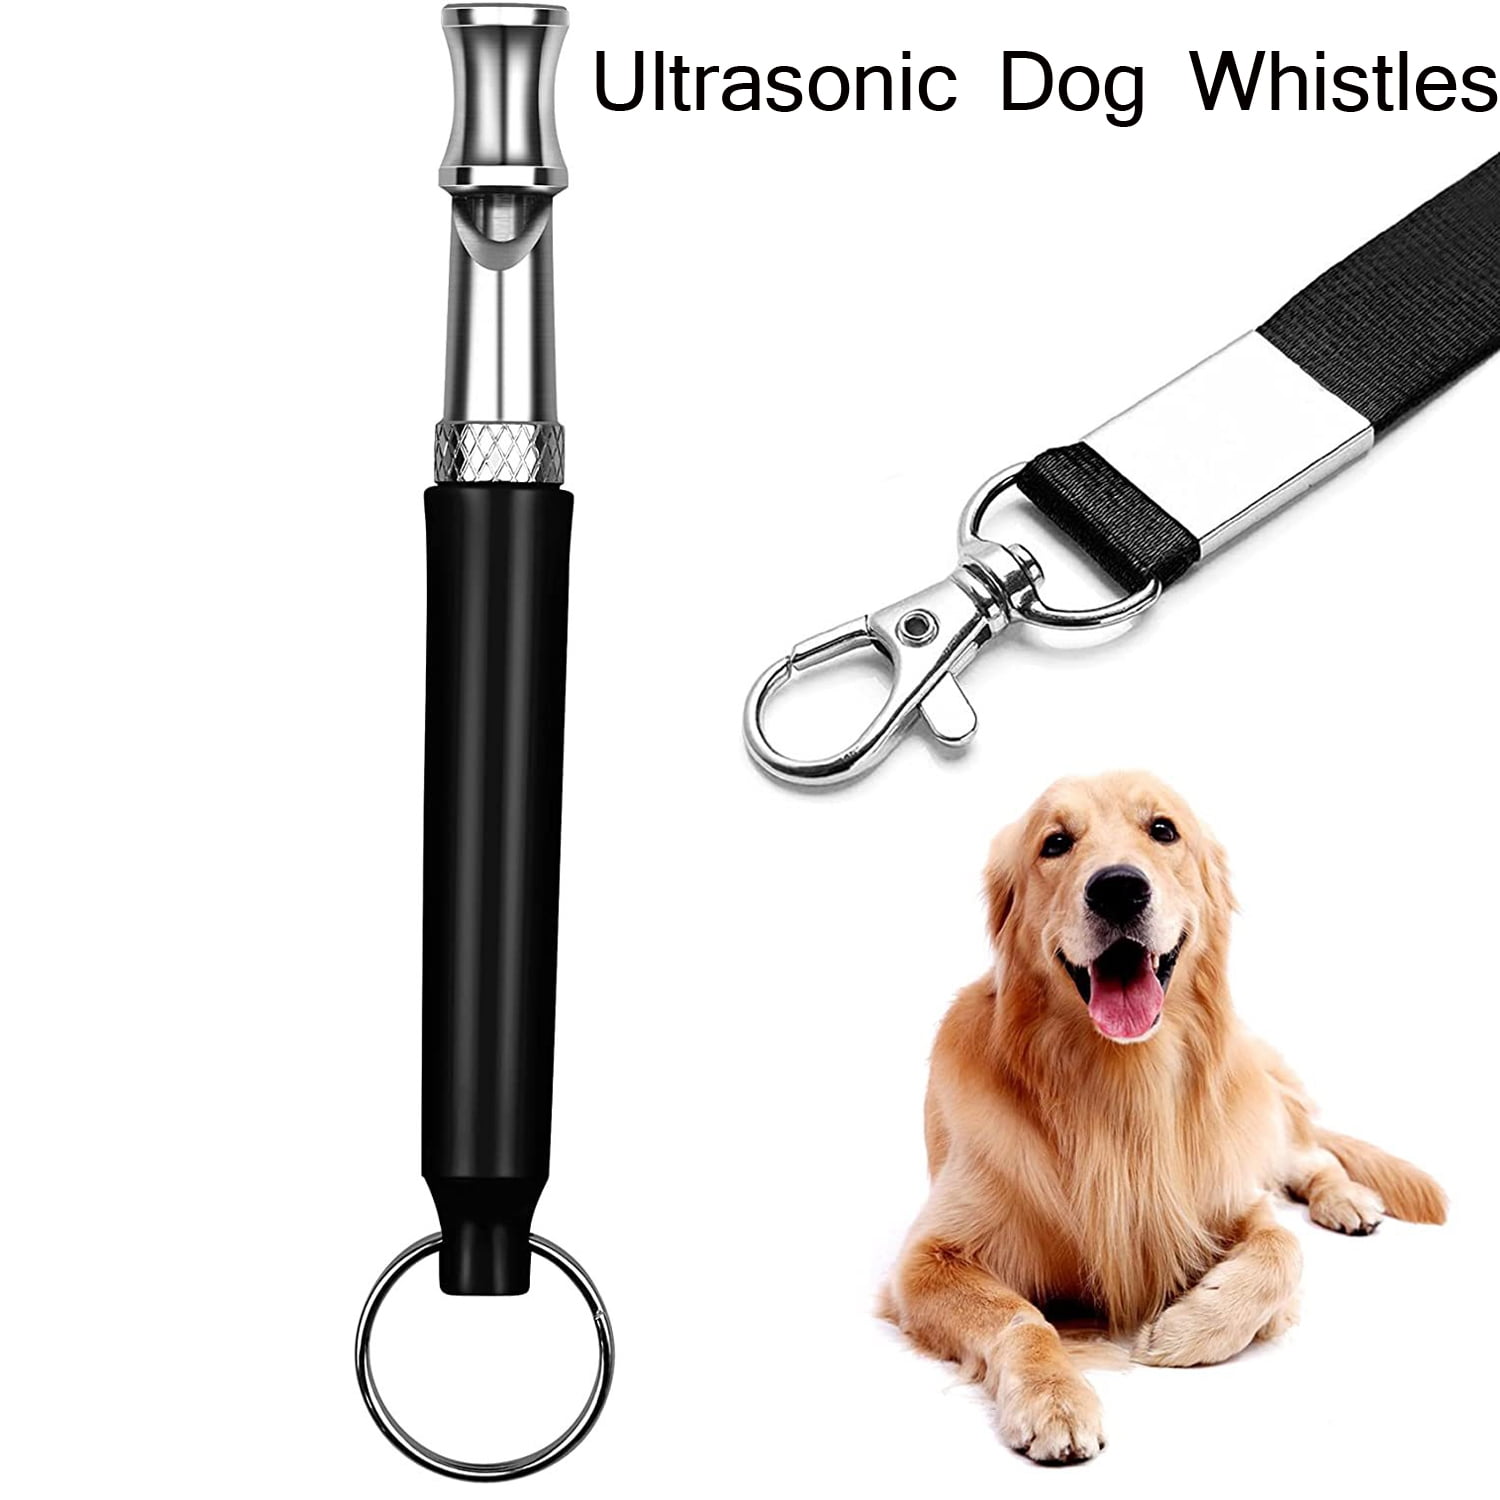 Dog Whistle for Recall Training Include Free Black Strap Lanyard Yellow Professional Dogs Whistles Howan Dog Training Whistle to Stop Barking 